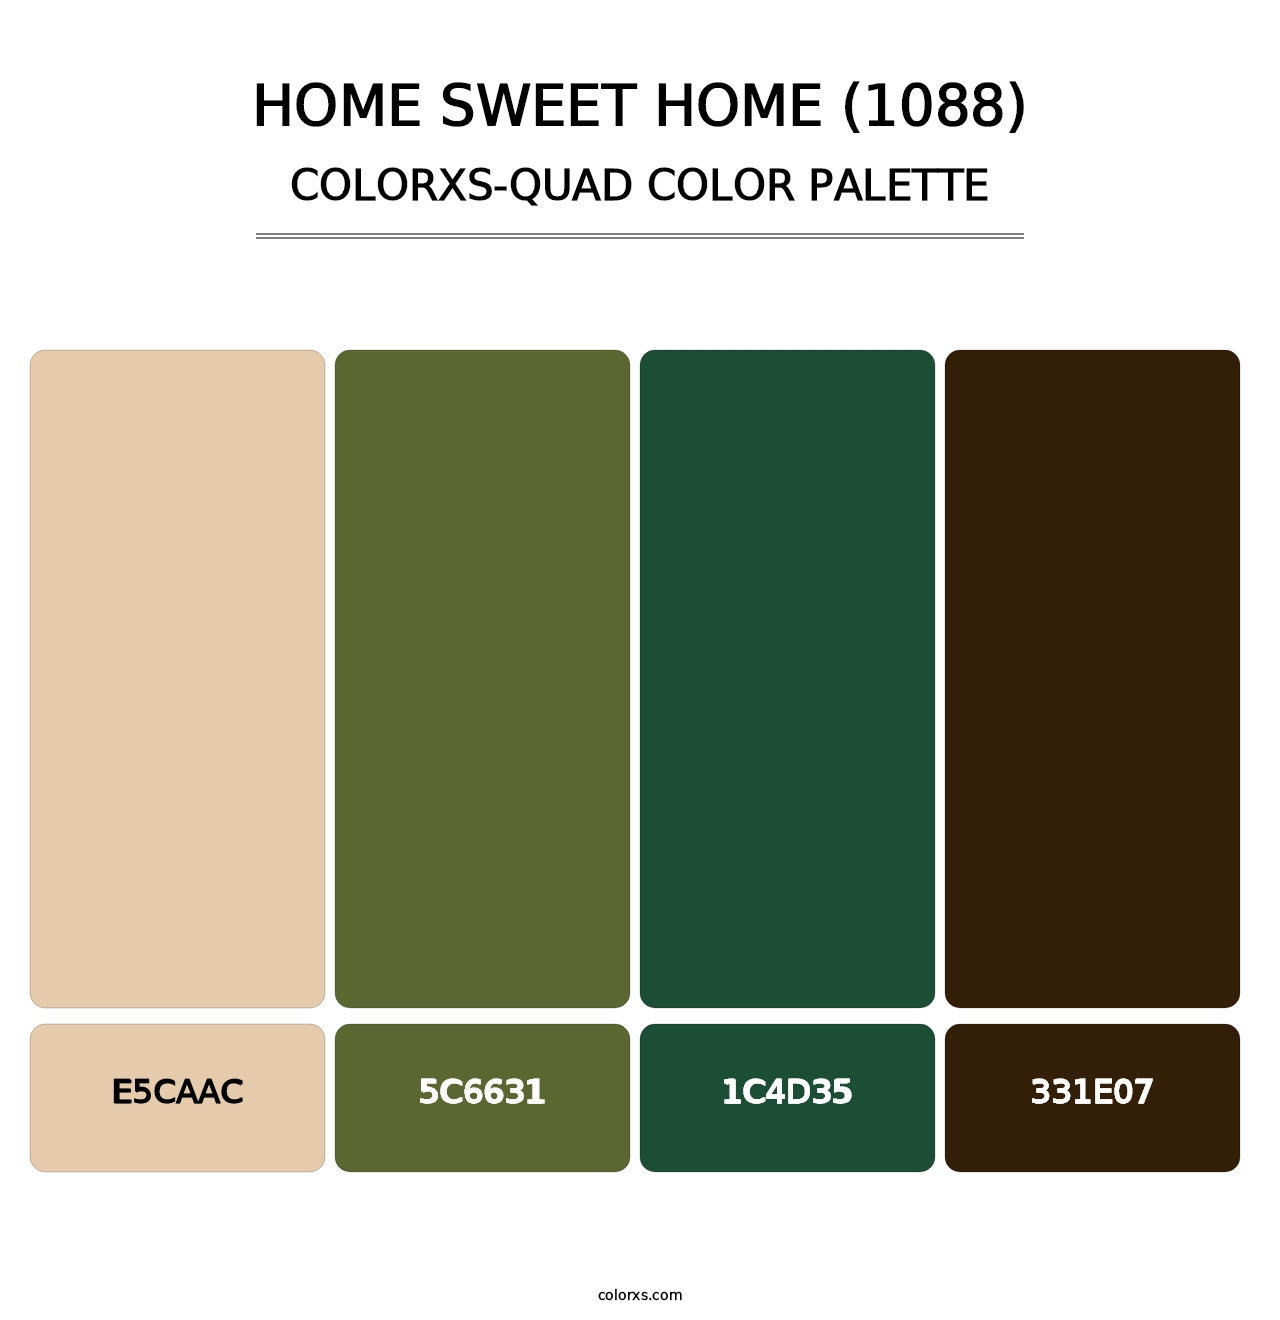 Home Sweet Home (1088) - Colorxs Quad Palette